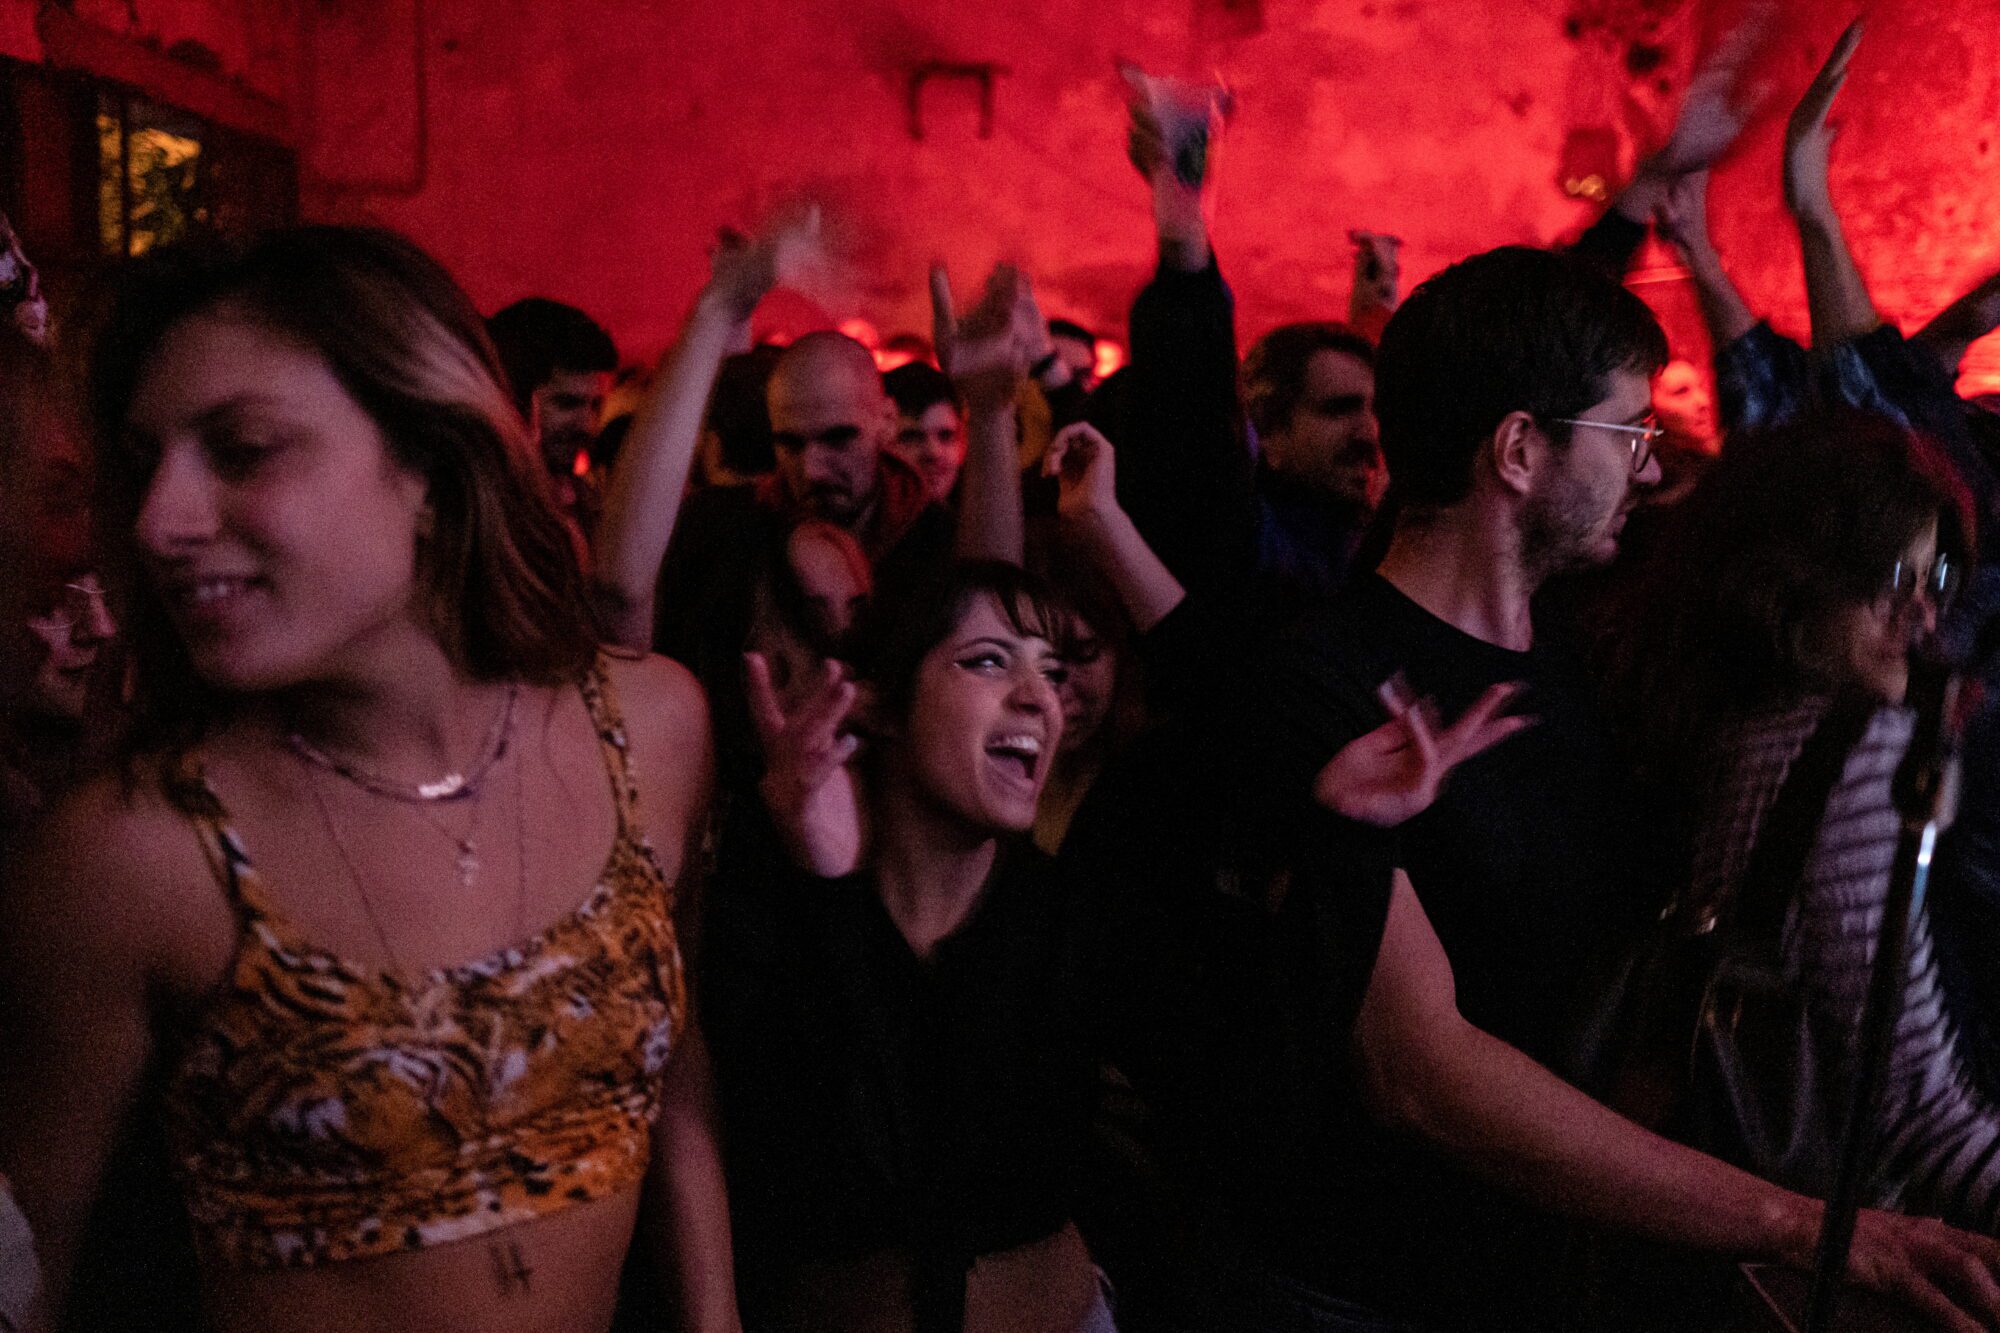 Turn down the volume as the World Health Organisation sets new safe limit for music venues